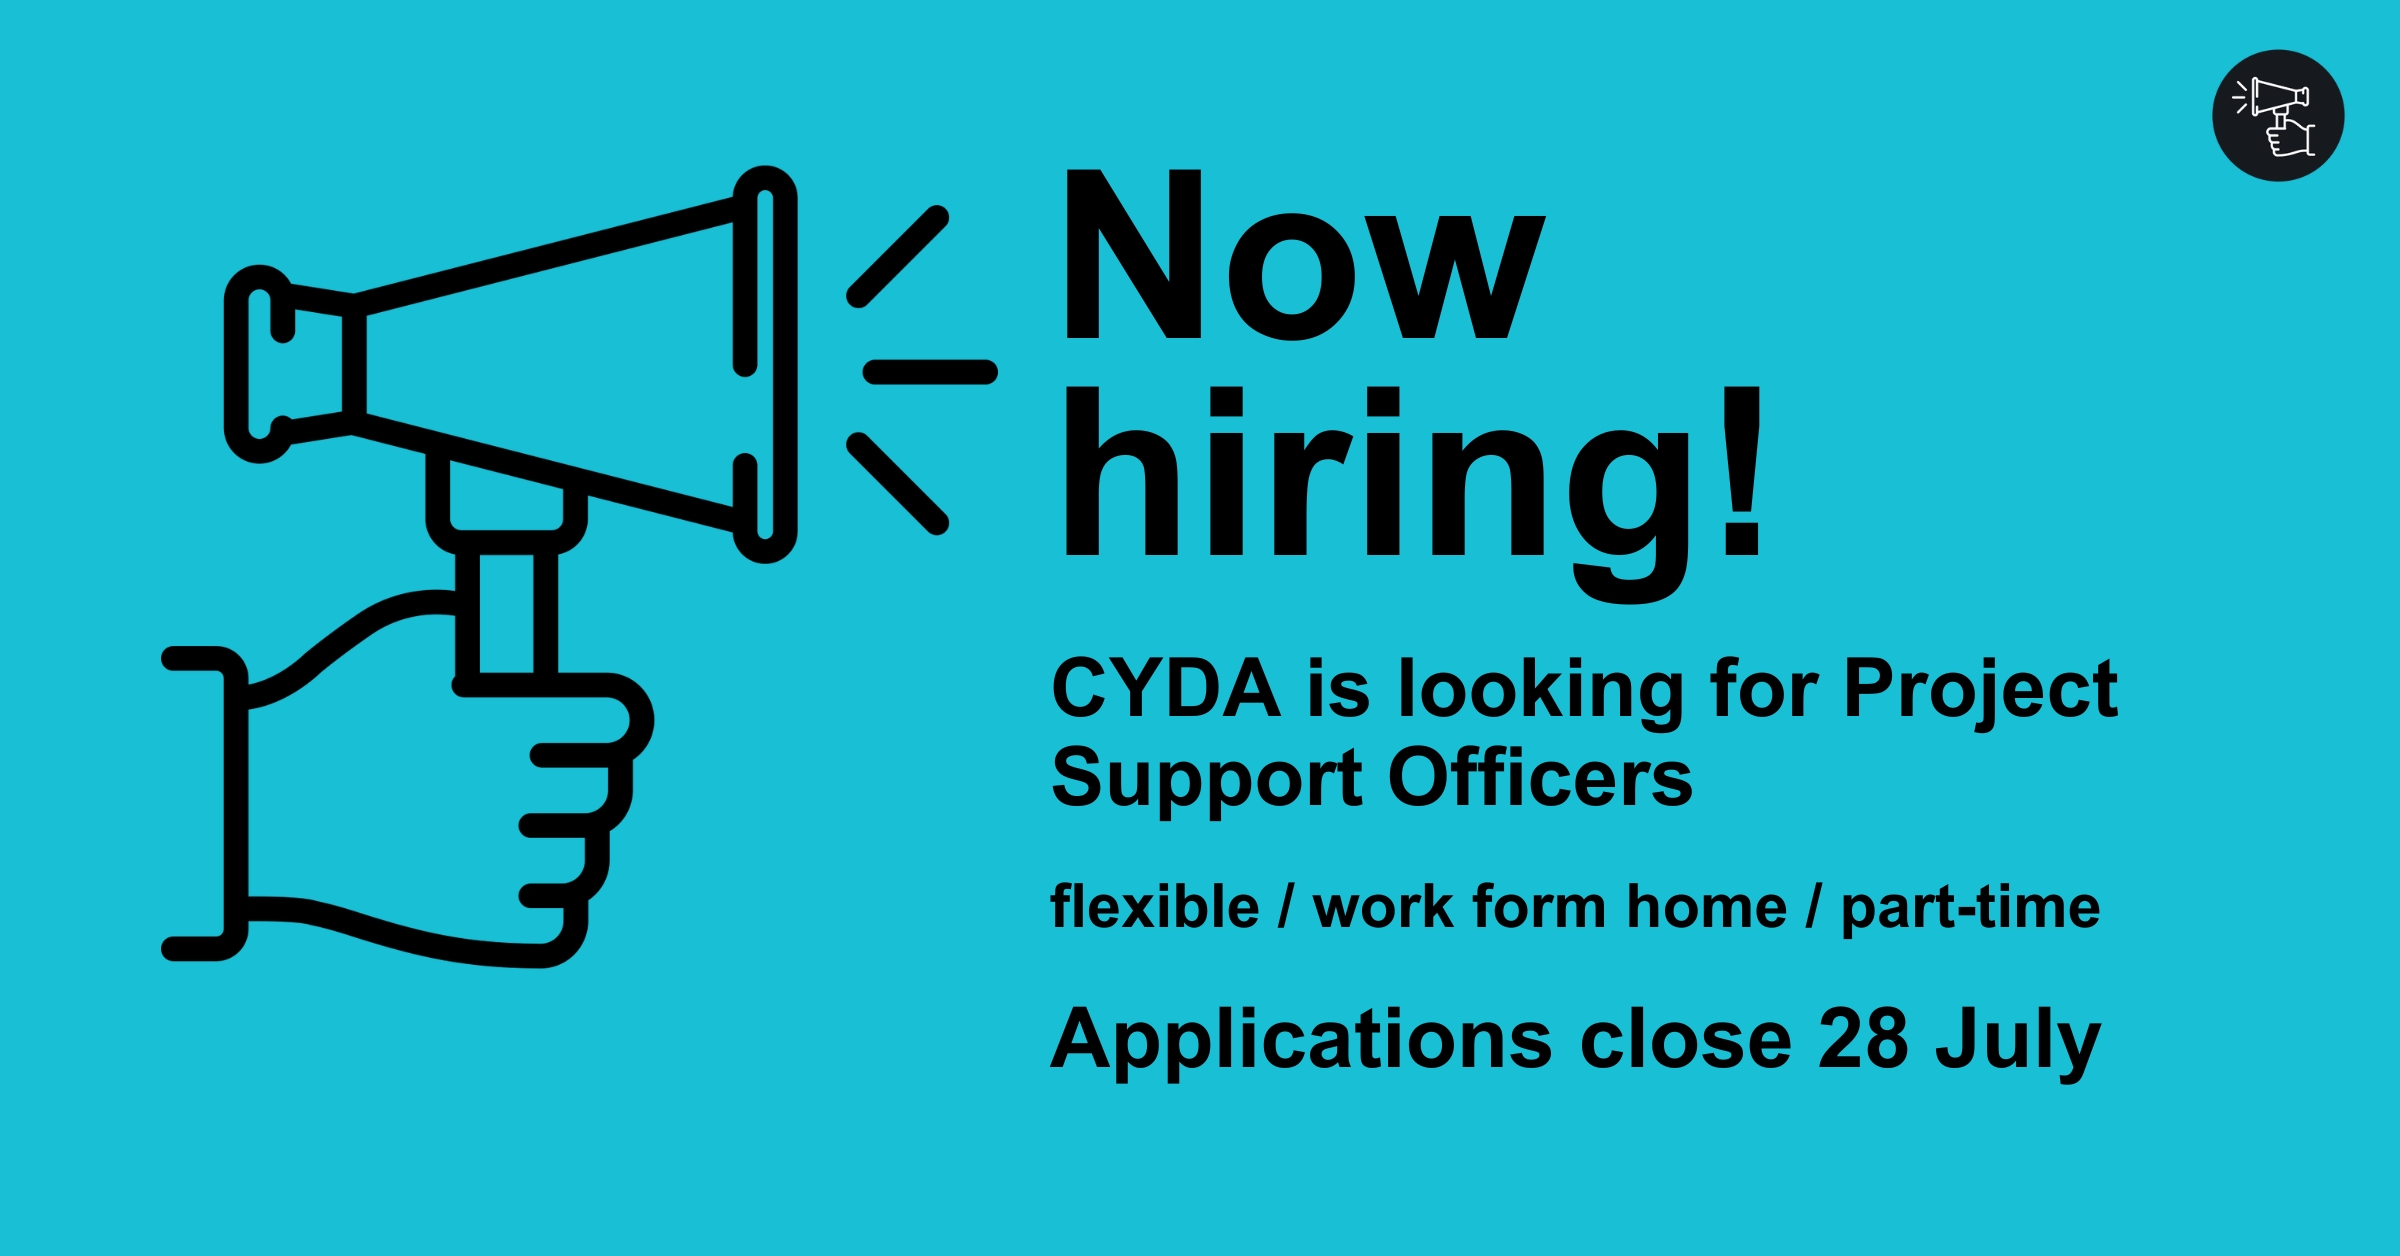 A megaphone on a blue background with text reading "Now hiring! CYDA is looking for Projects Support Officers. flexible/work from home/part-time. Applications close 28 July".